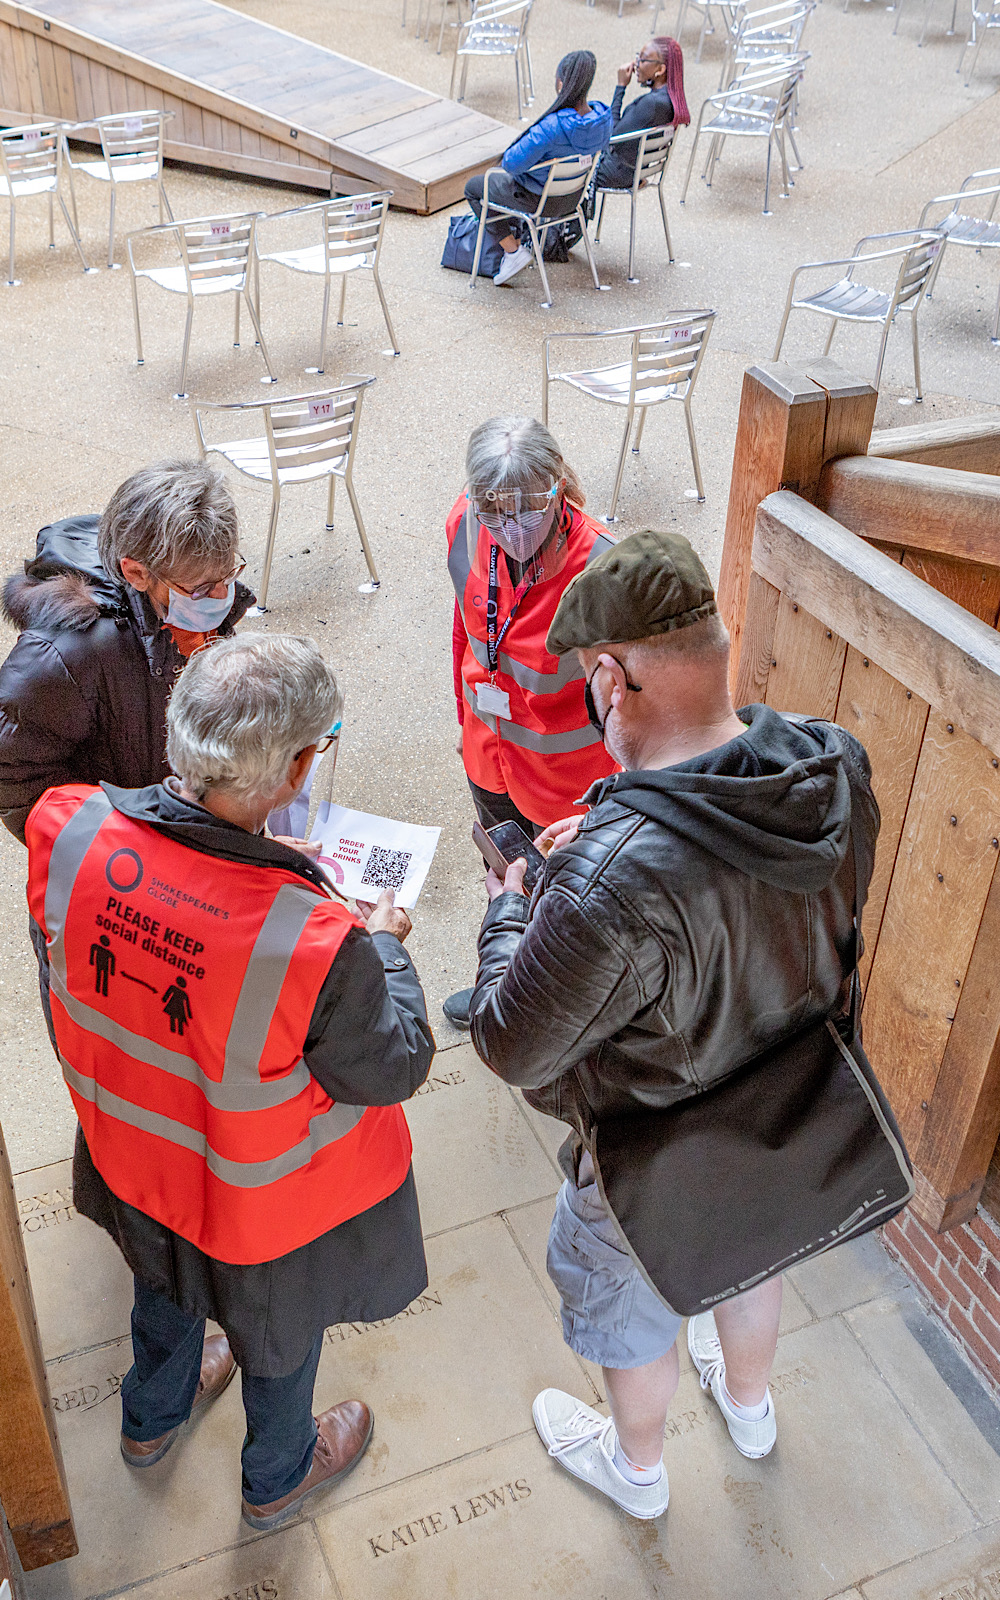 Members of staff in high-vis jackets talk to audience members as they enter an outdoor theatre